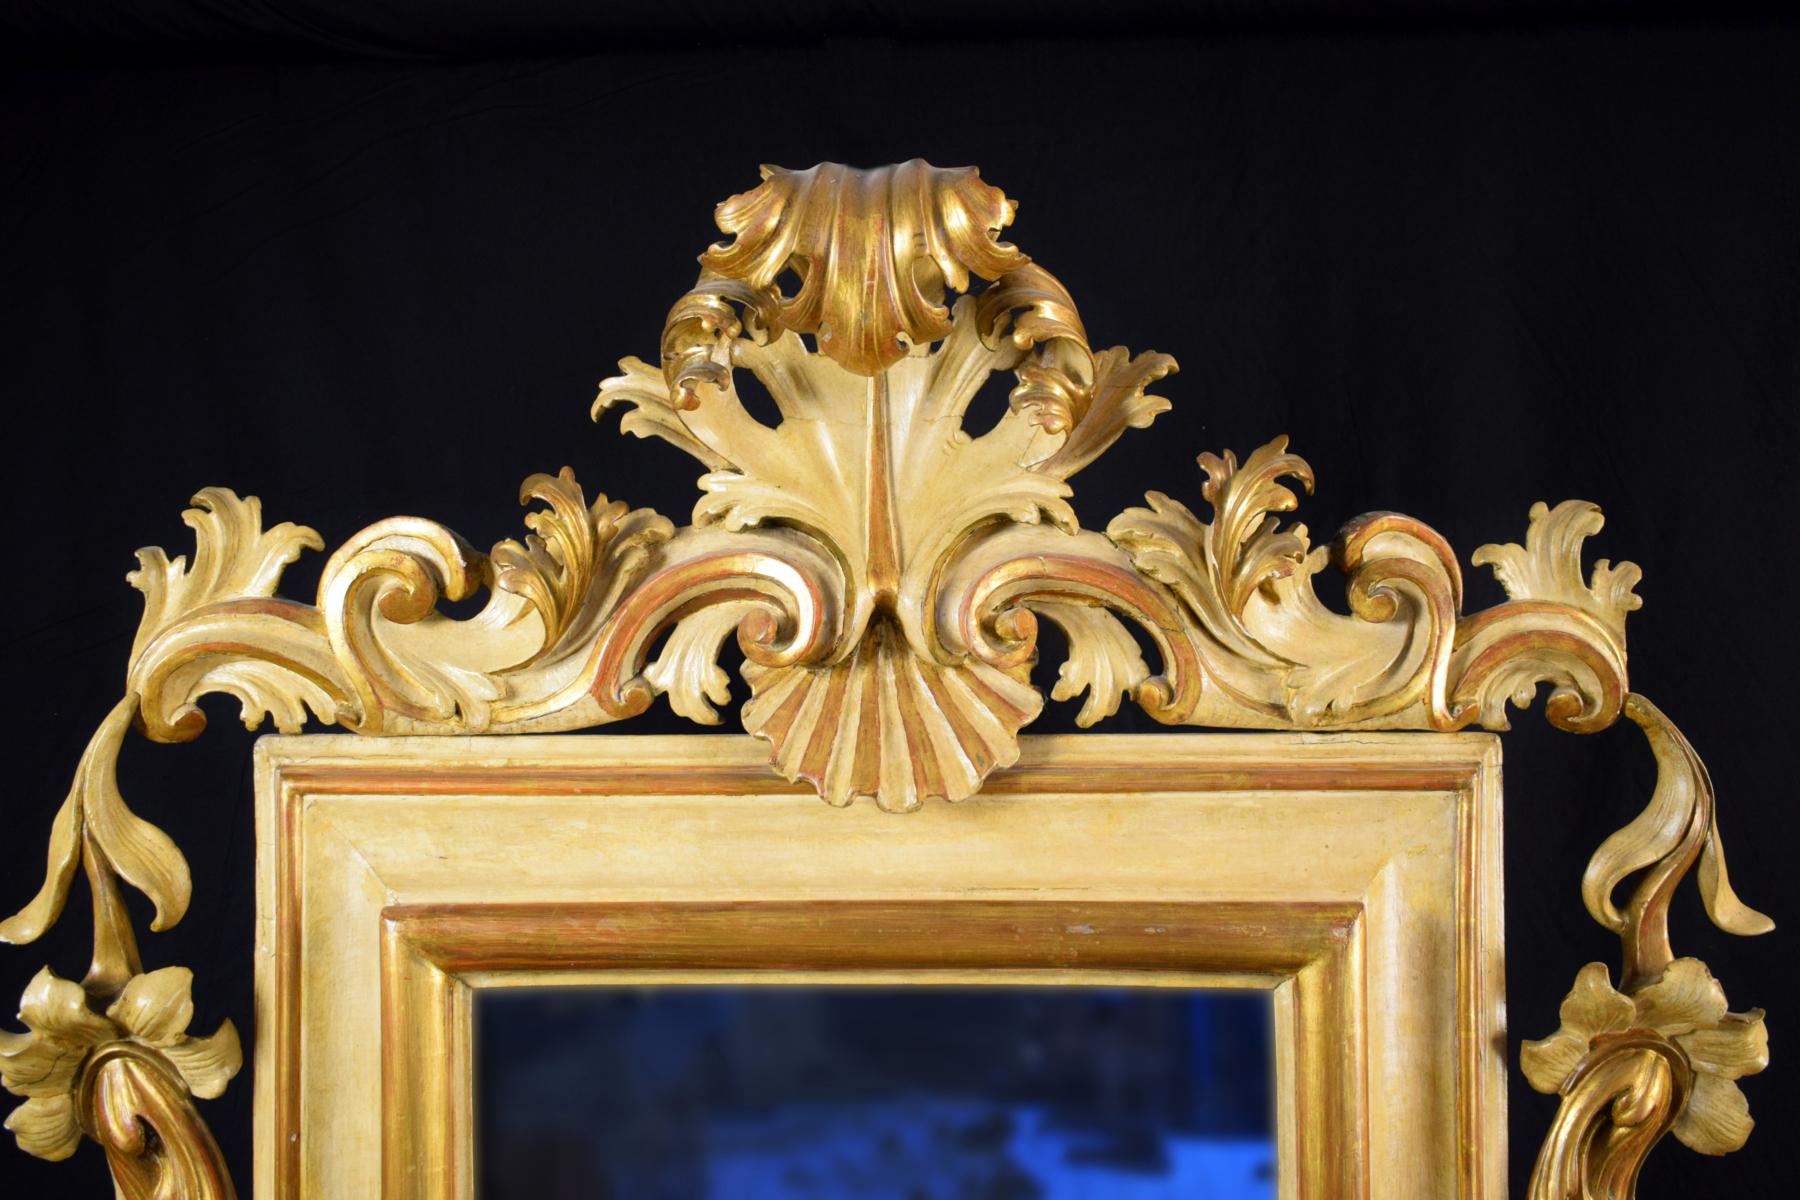 18th century, large Italian lacquered and giltwood mirror with rocaille motifs

The large mirror in finely carved wood, gilded and lacquered, was made in the northern of Italy (Venetian area) in the early eighteenth century.
It has a central box